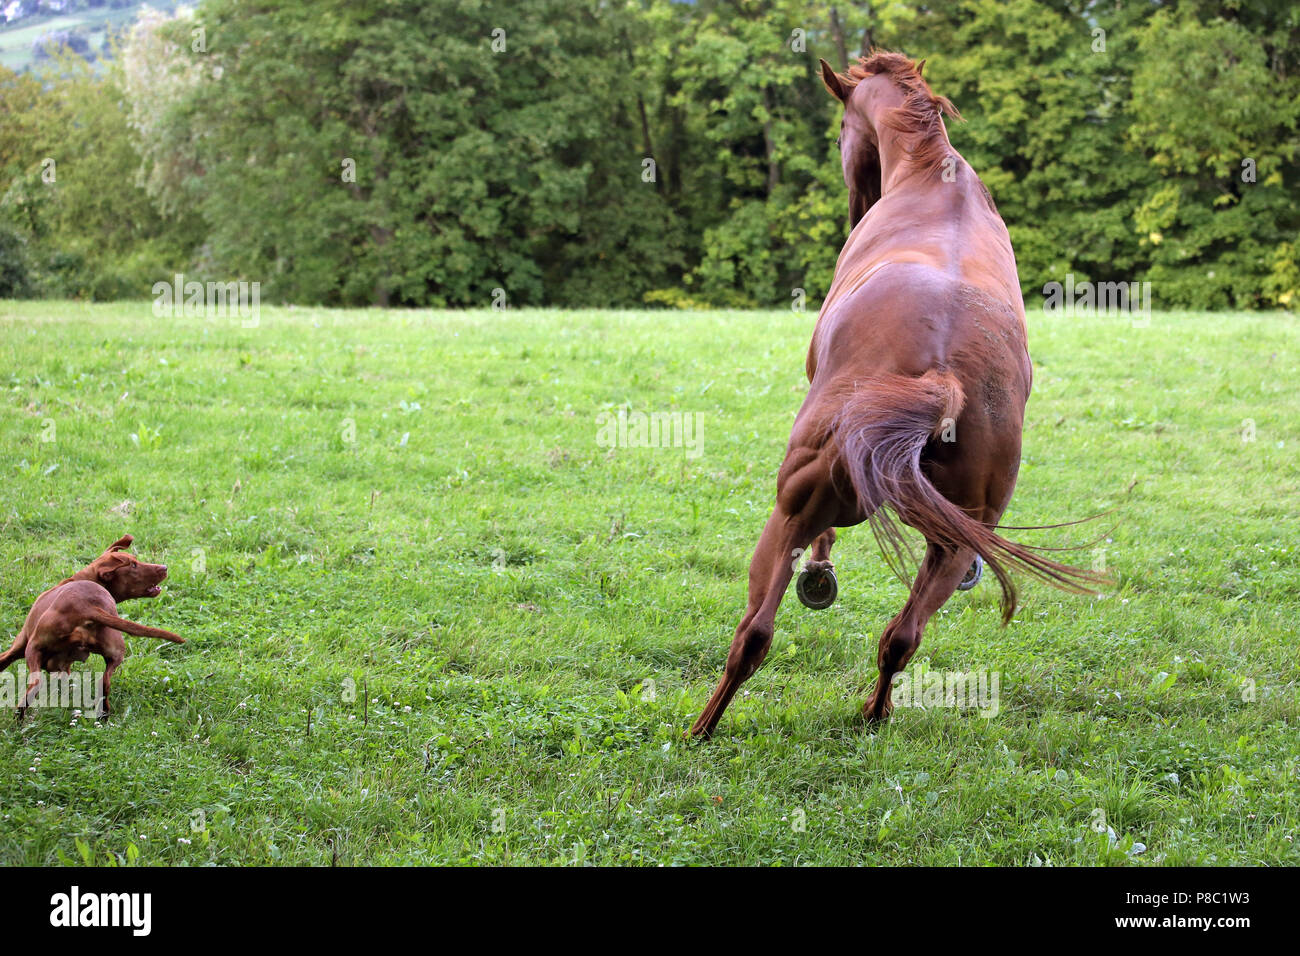 Gesture Westerberg, horse and dog play together in the pasture Stock Photo